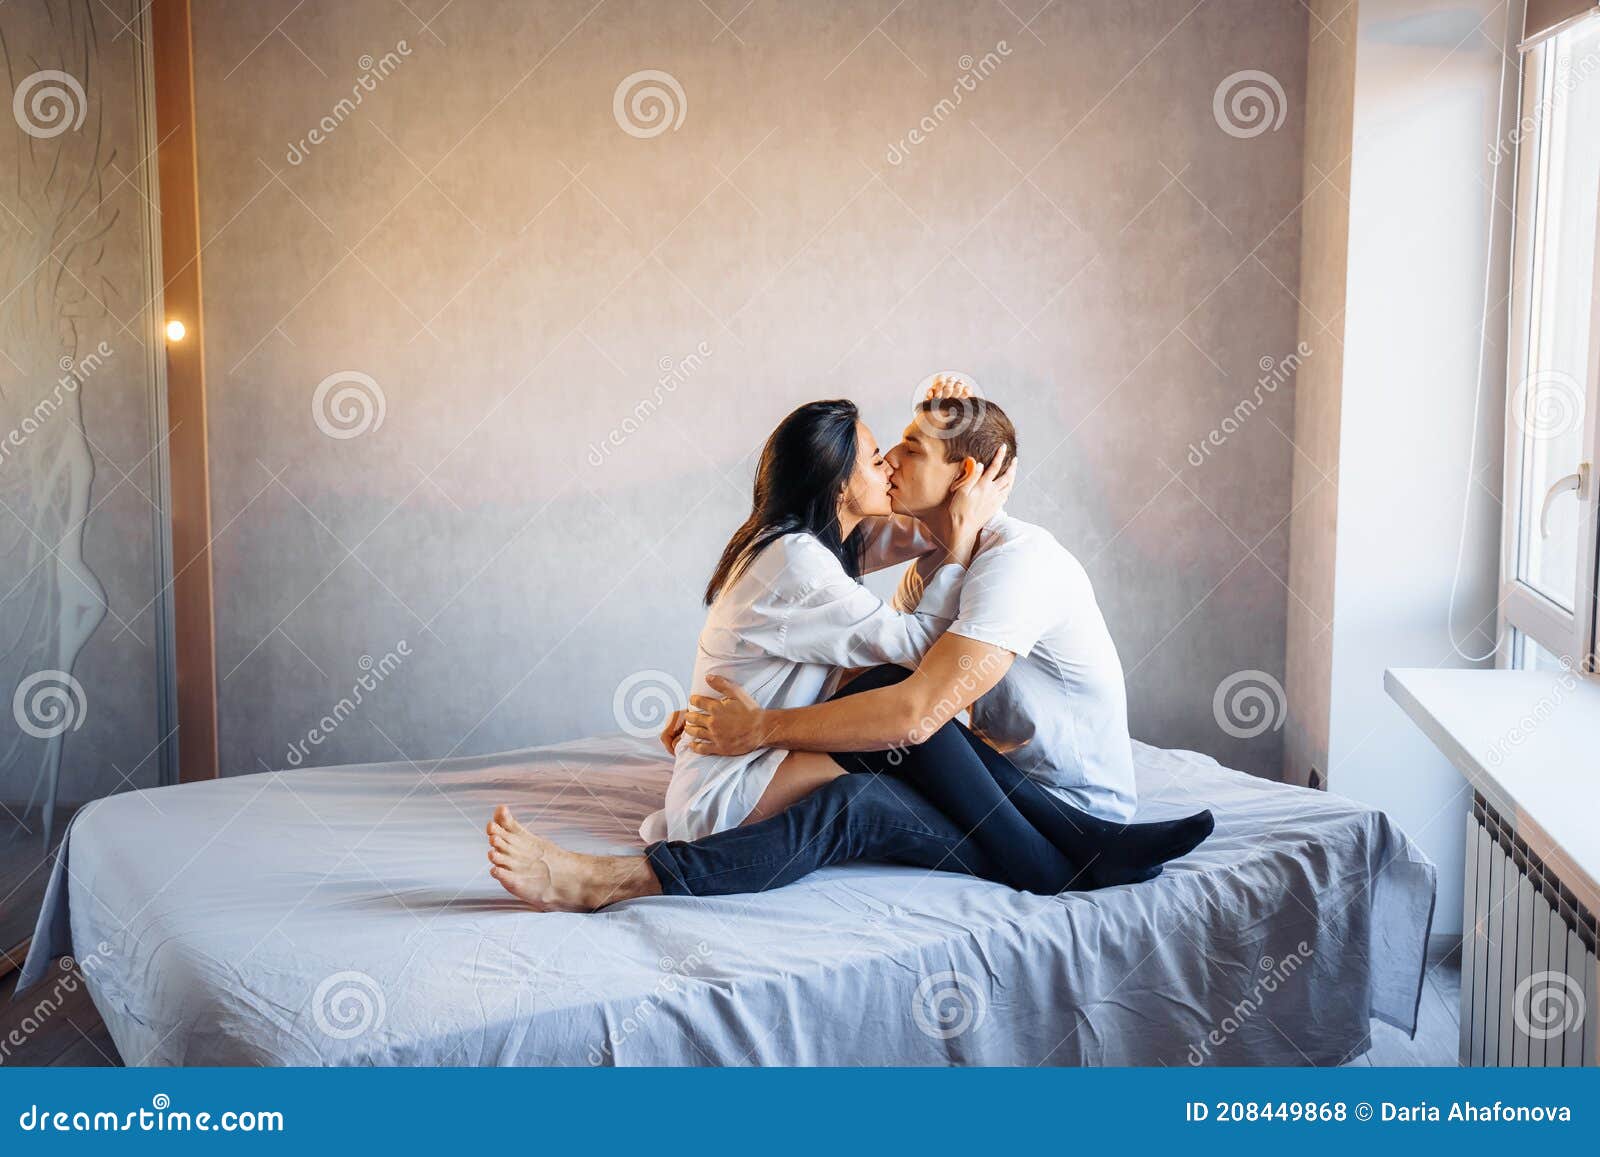 Attractive, Young Couple of Lovers Having Sex at Home in the Bed in Bright Room image